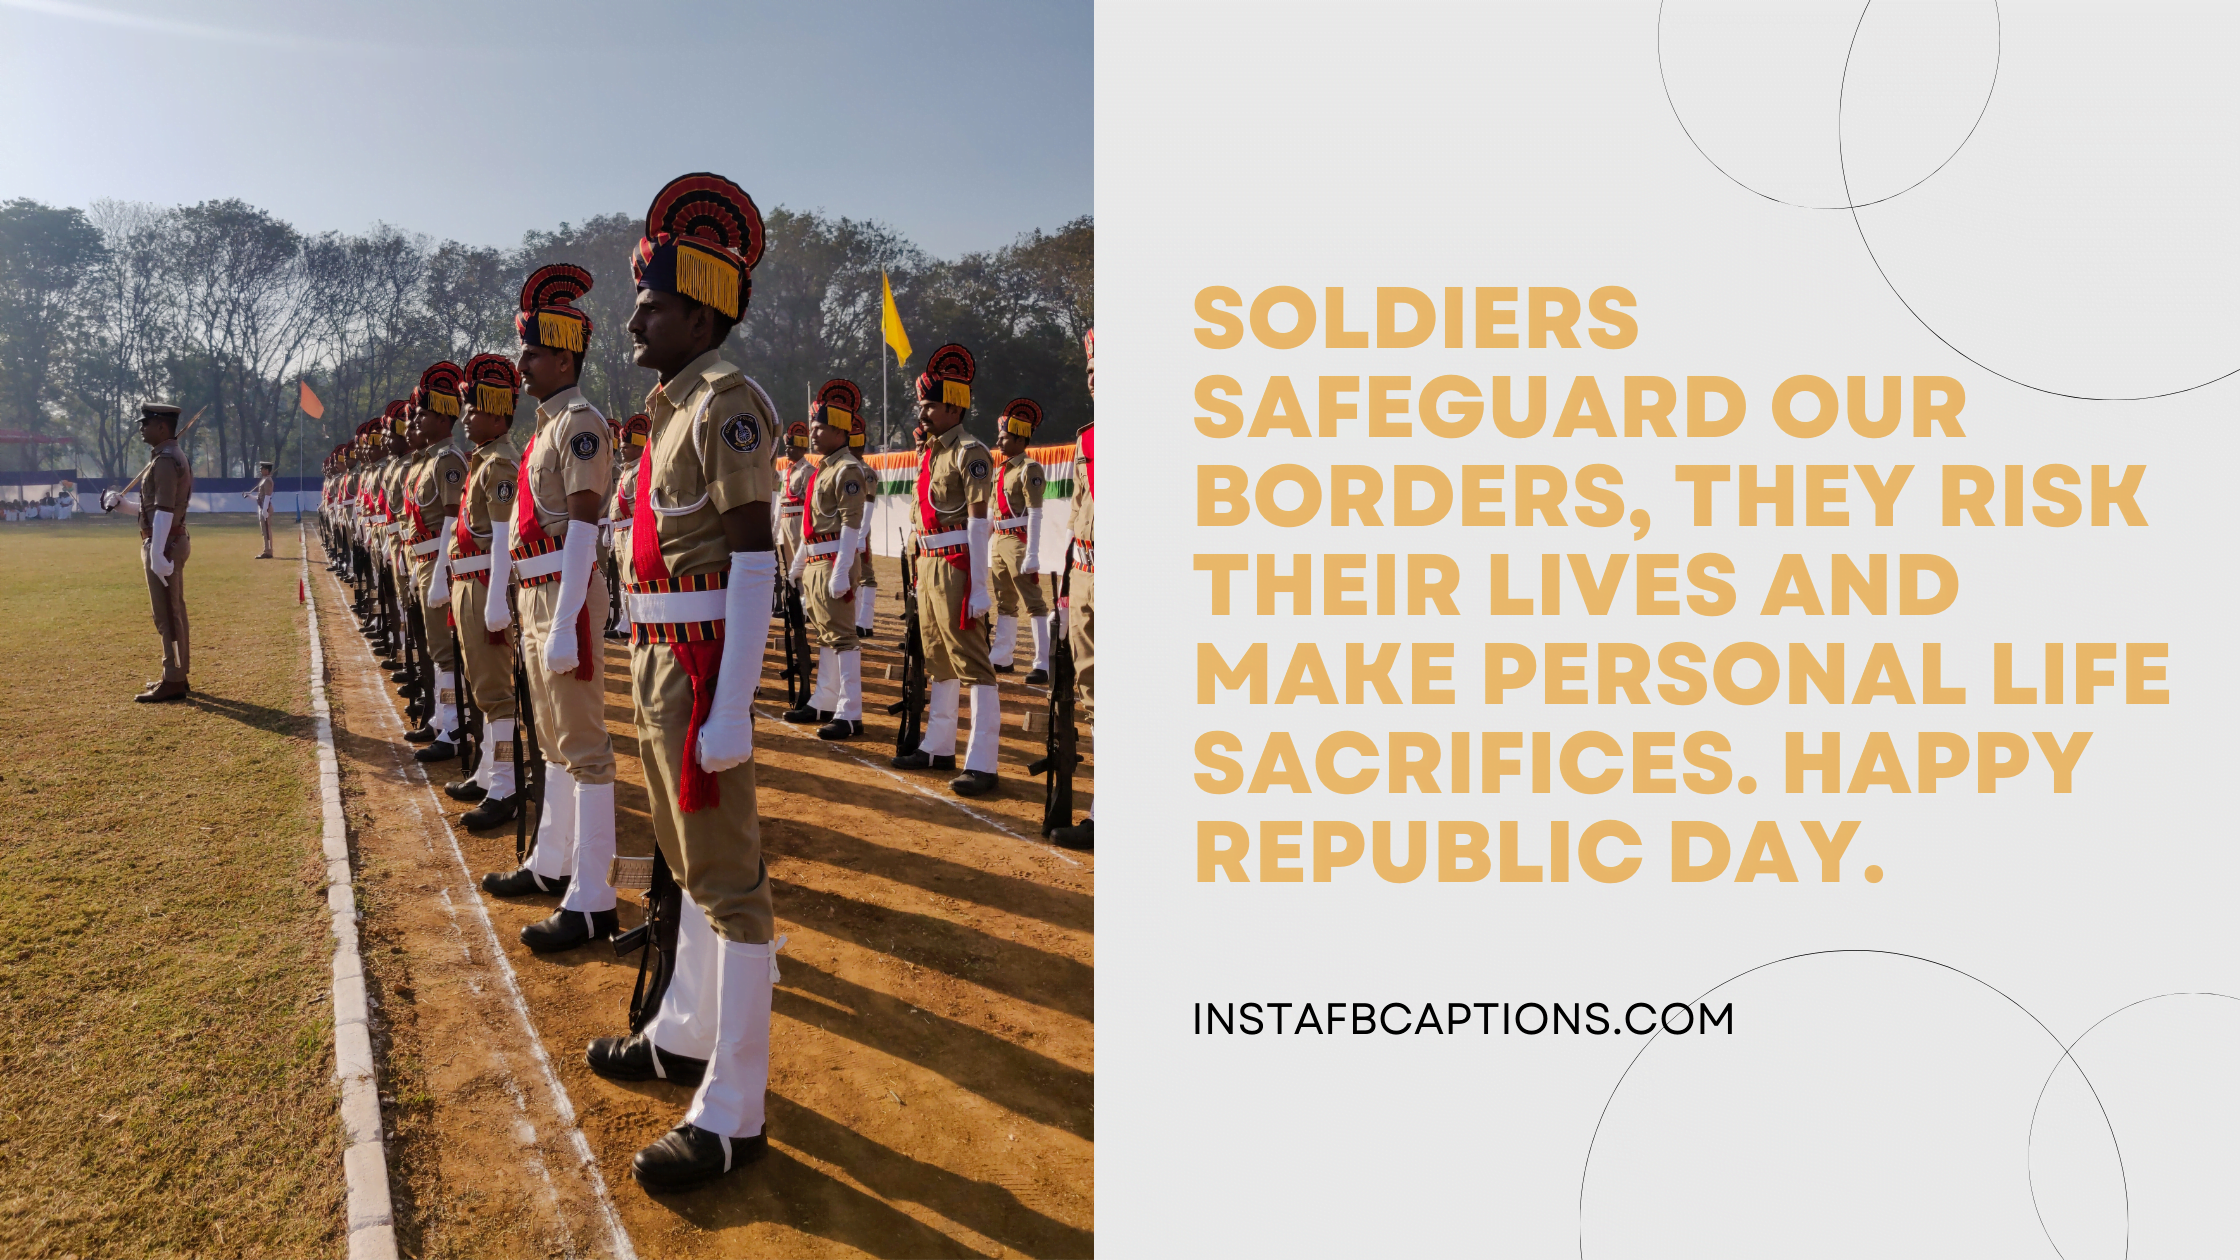 Republic Day Captions For Soldiers  - Republic Day Captions for Soldiers - 50+ REPUBLIC DAY Instagram Captions &amp; Quotes 2022